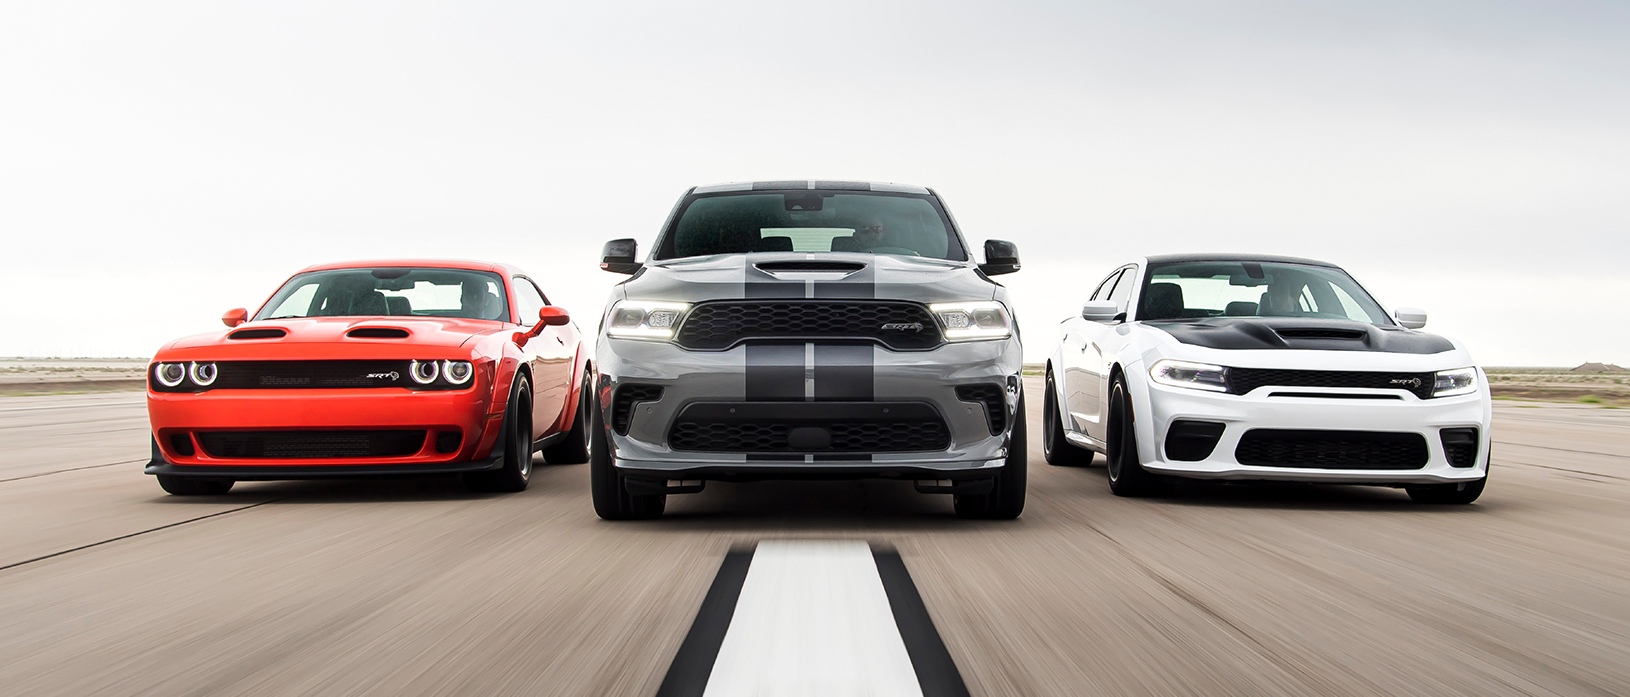 Dodge First-Ever Domestic Brand to Achieve Top APEAL, IQS Finishes in Same Year